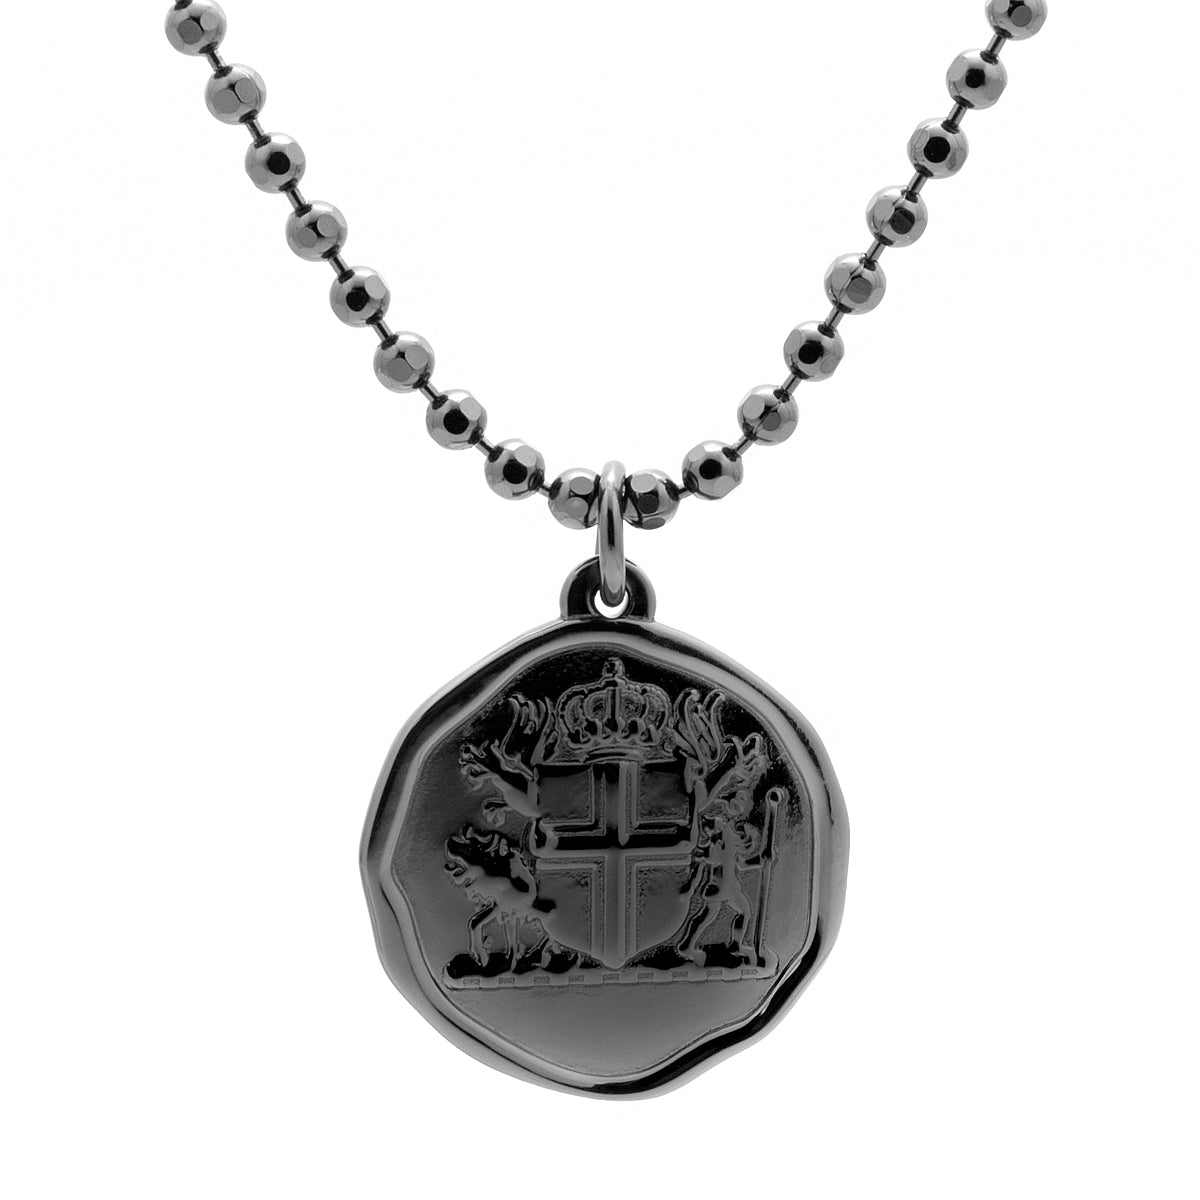 ICELAND COAT OF ARMS PENDANT BLACK